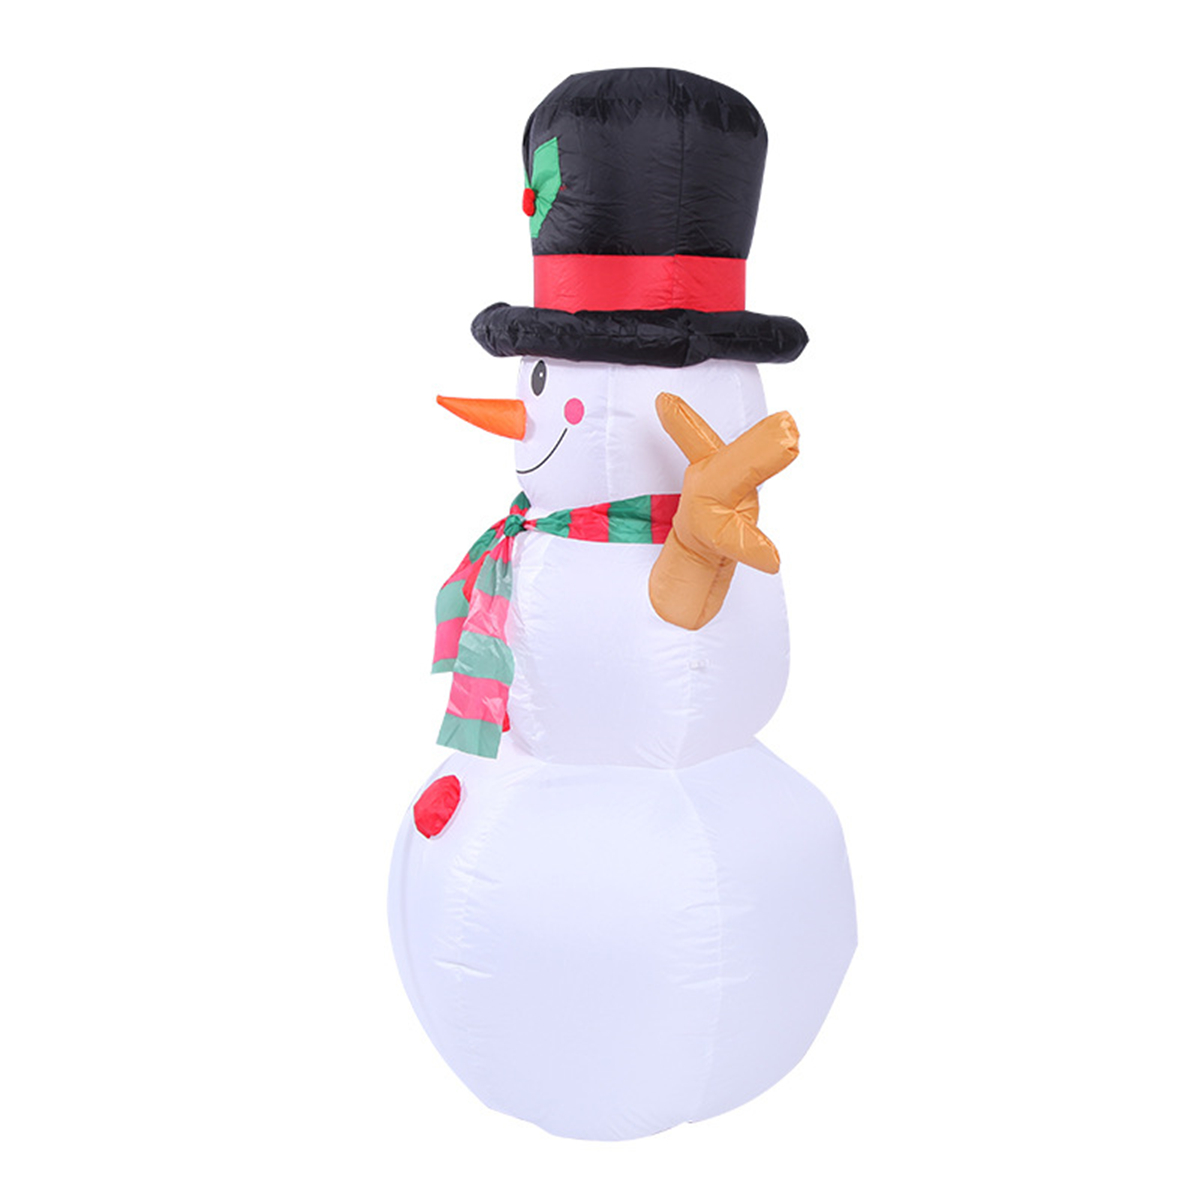 160cm-LED-Inflatable-Snowman-Christmas-Indoor-Outdoor-Home-Yard-Party-Decorations-1370486